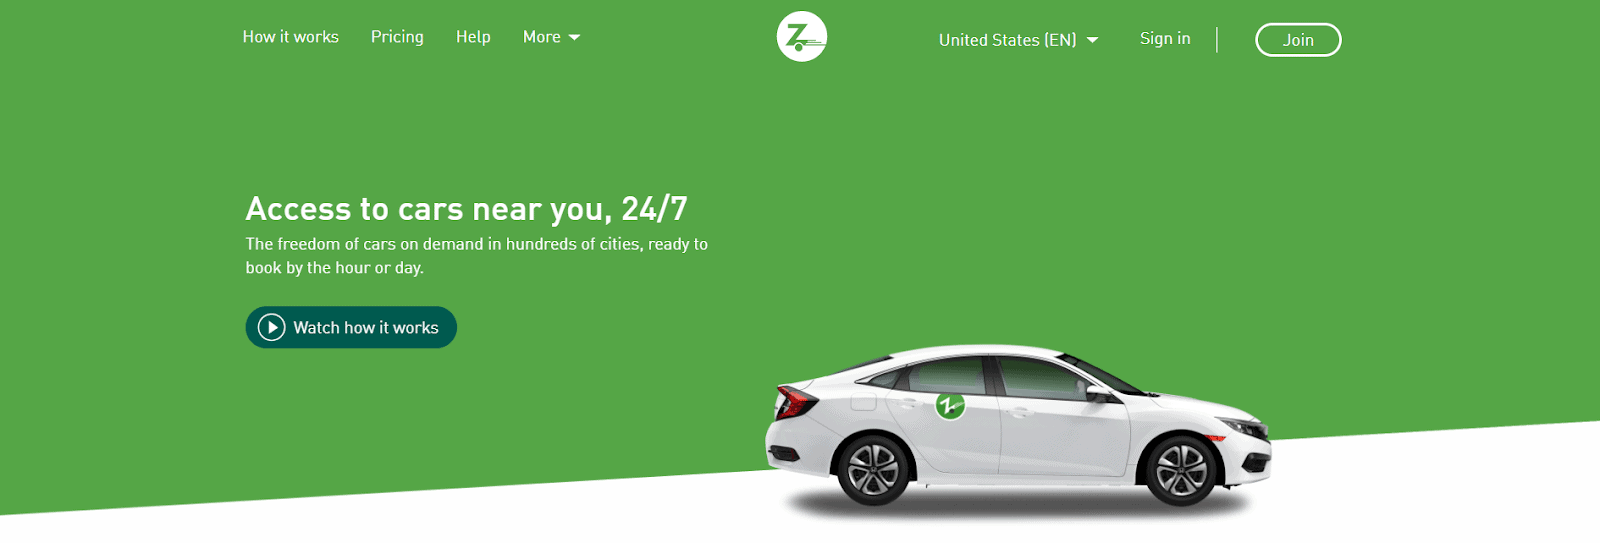 6 Best Car Share Services And How They Work [2022 Update]